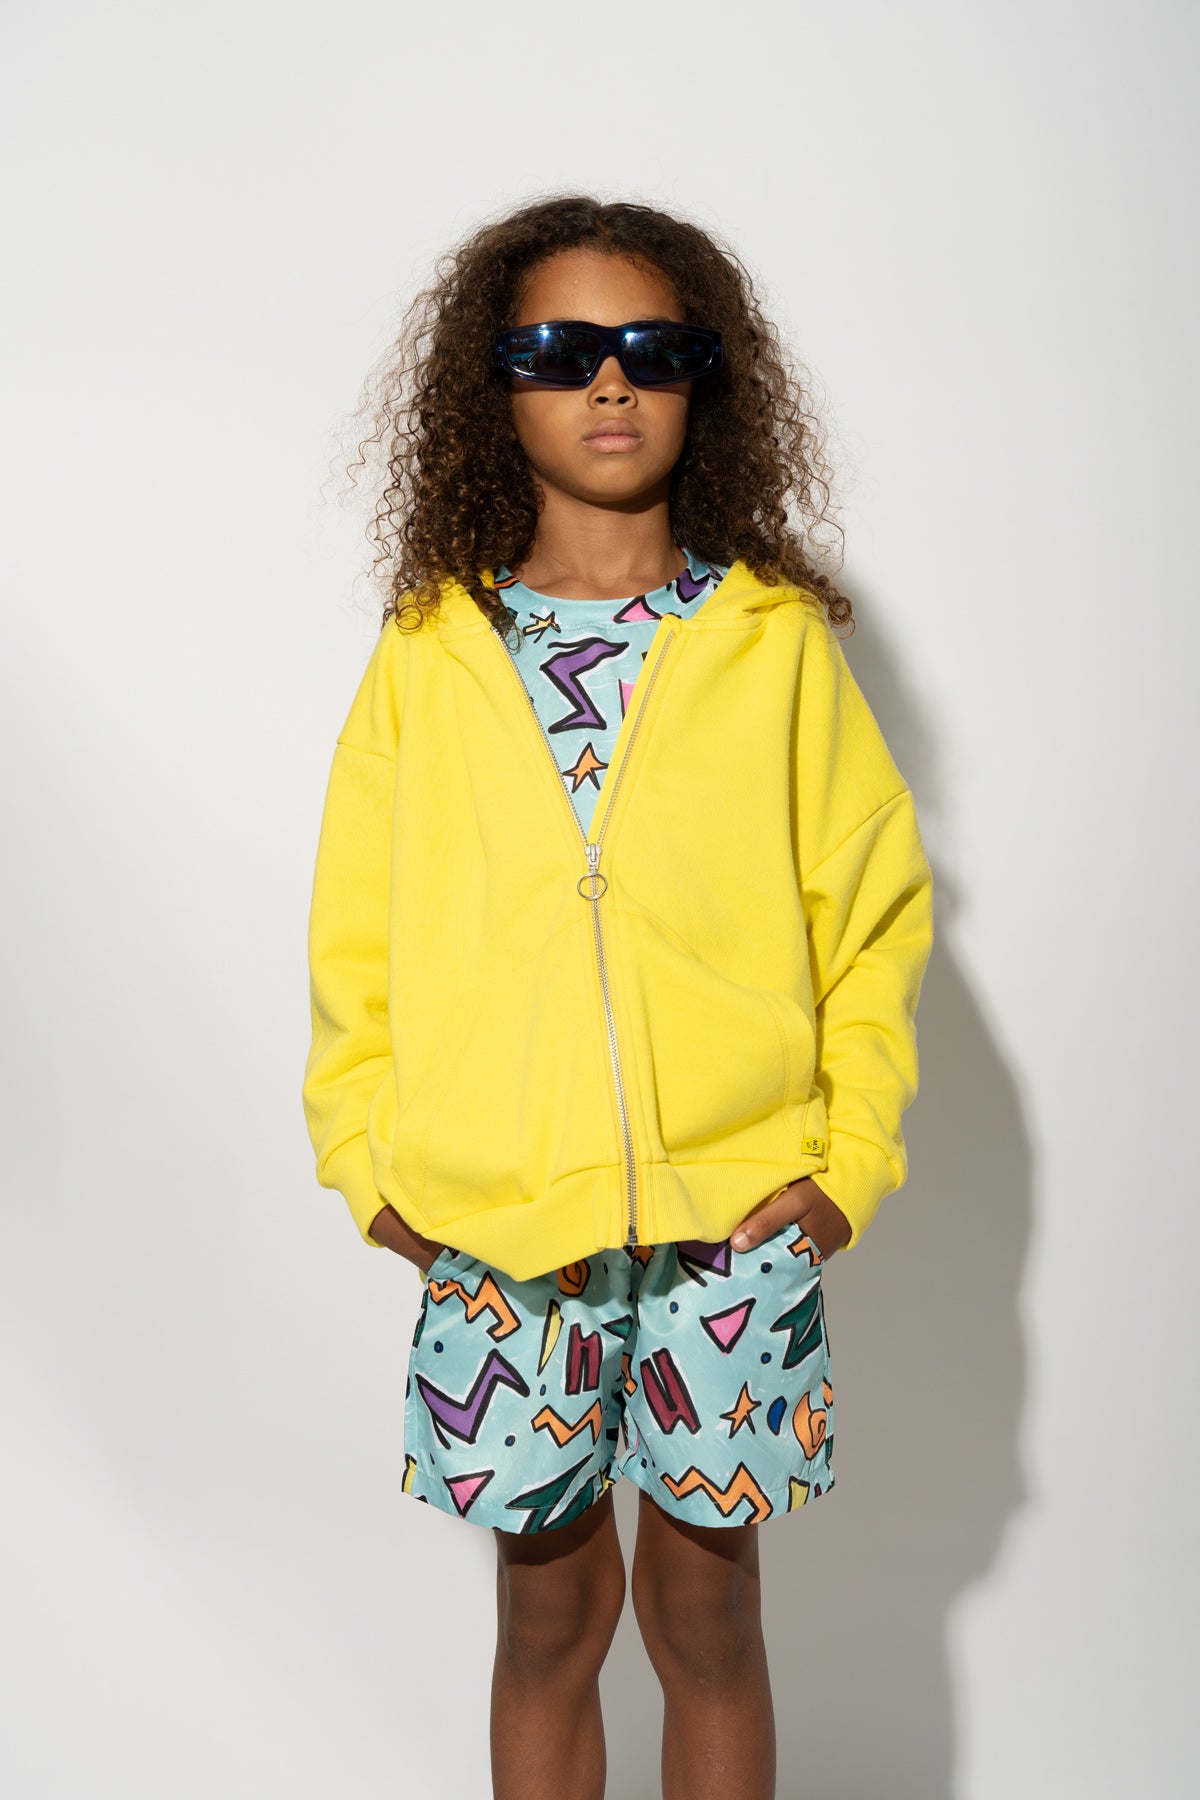 YELLOW JACKET WITH EMBROIDERED LOGO MA KIDS